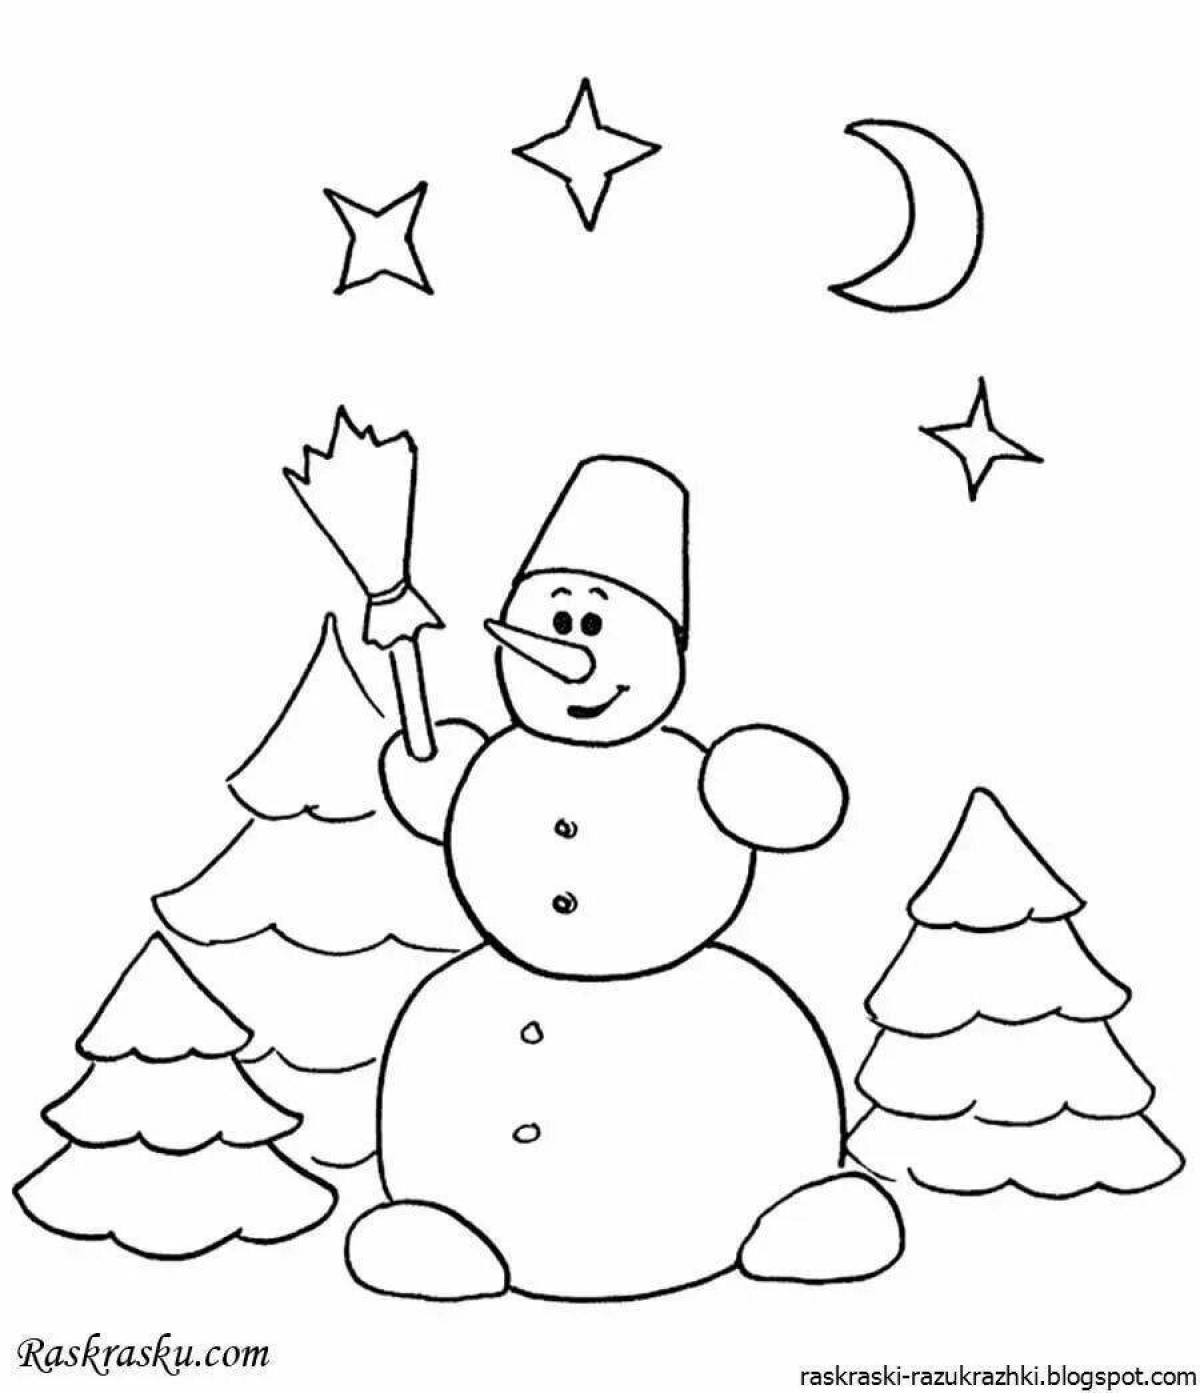 Bright Christmas snowman coloring book